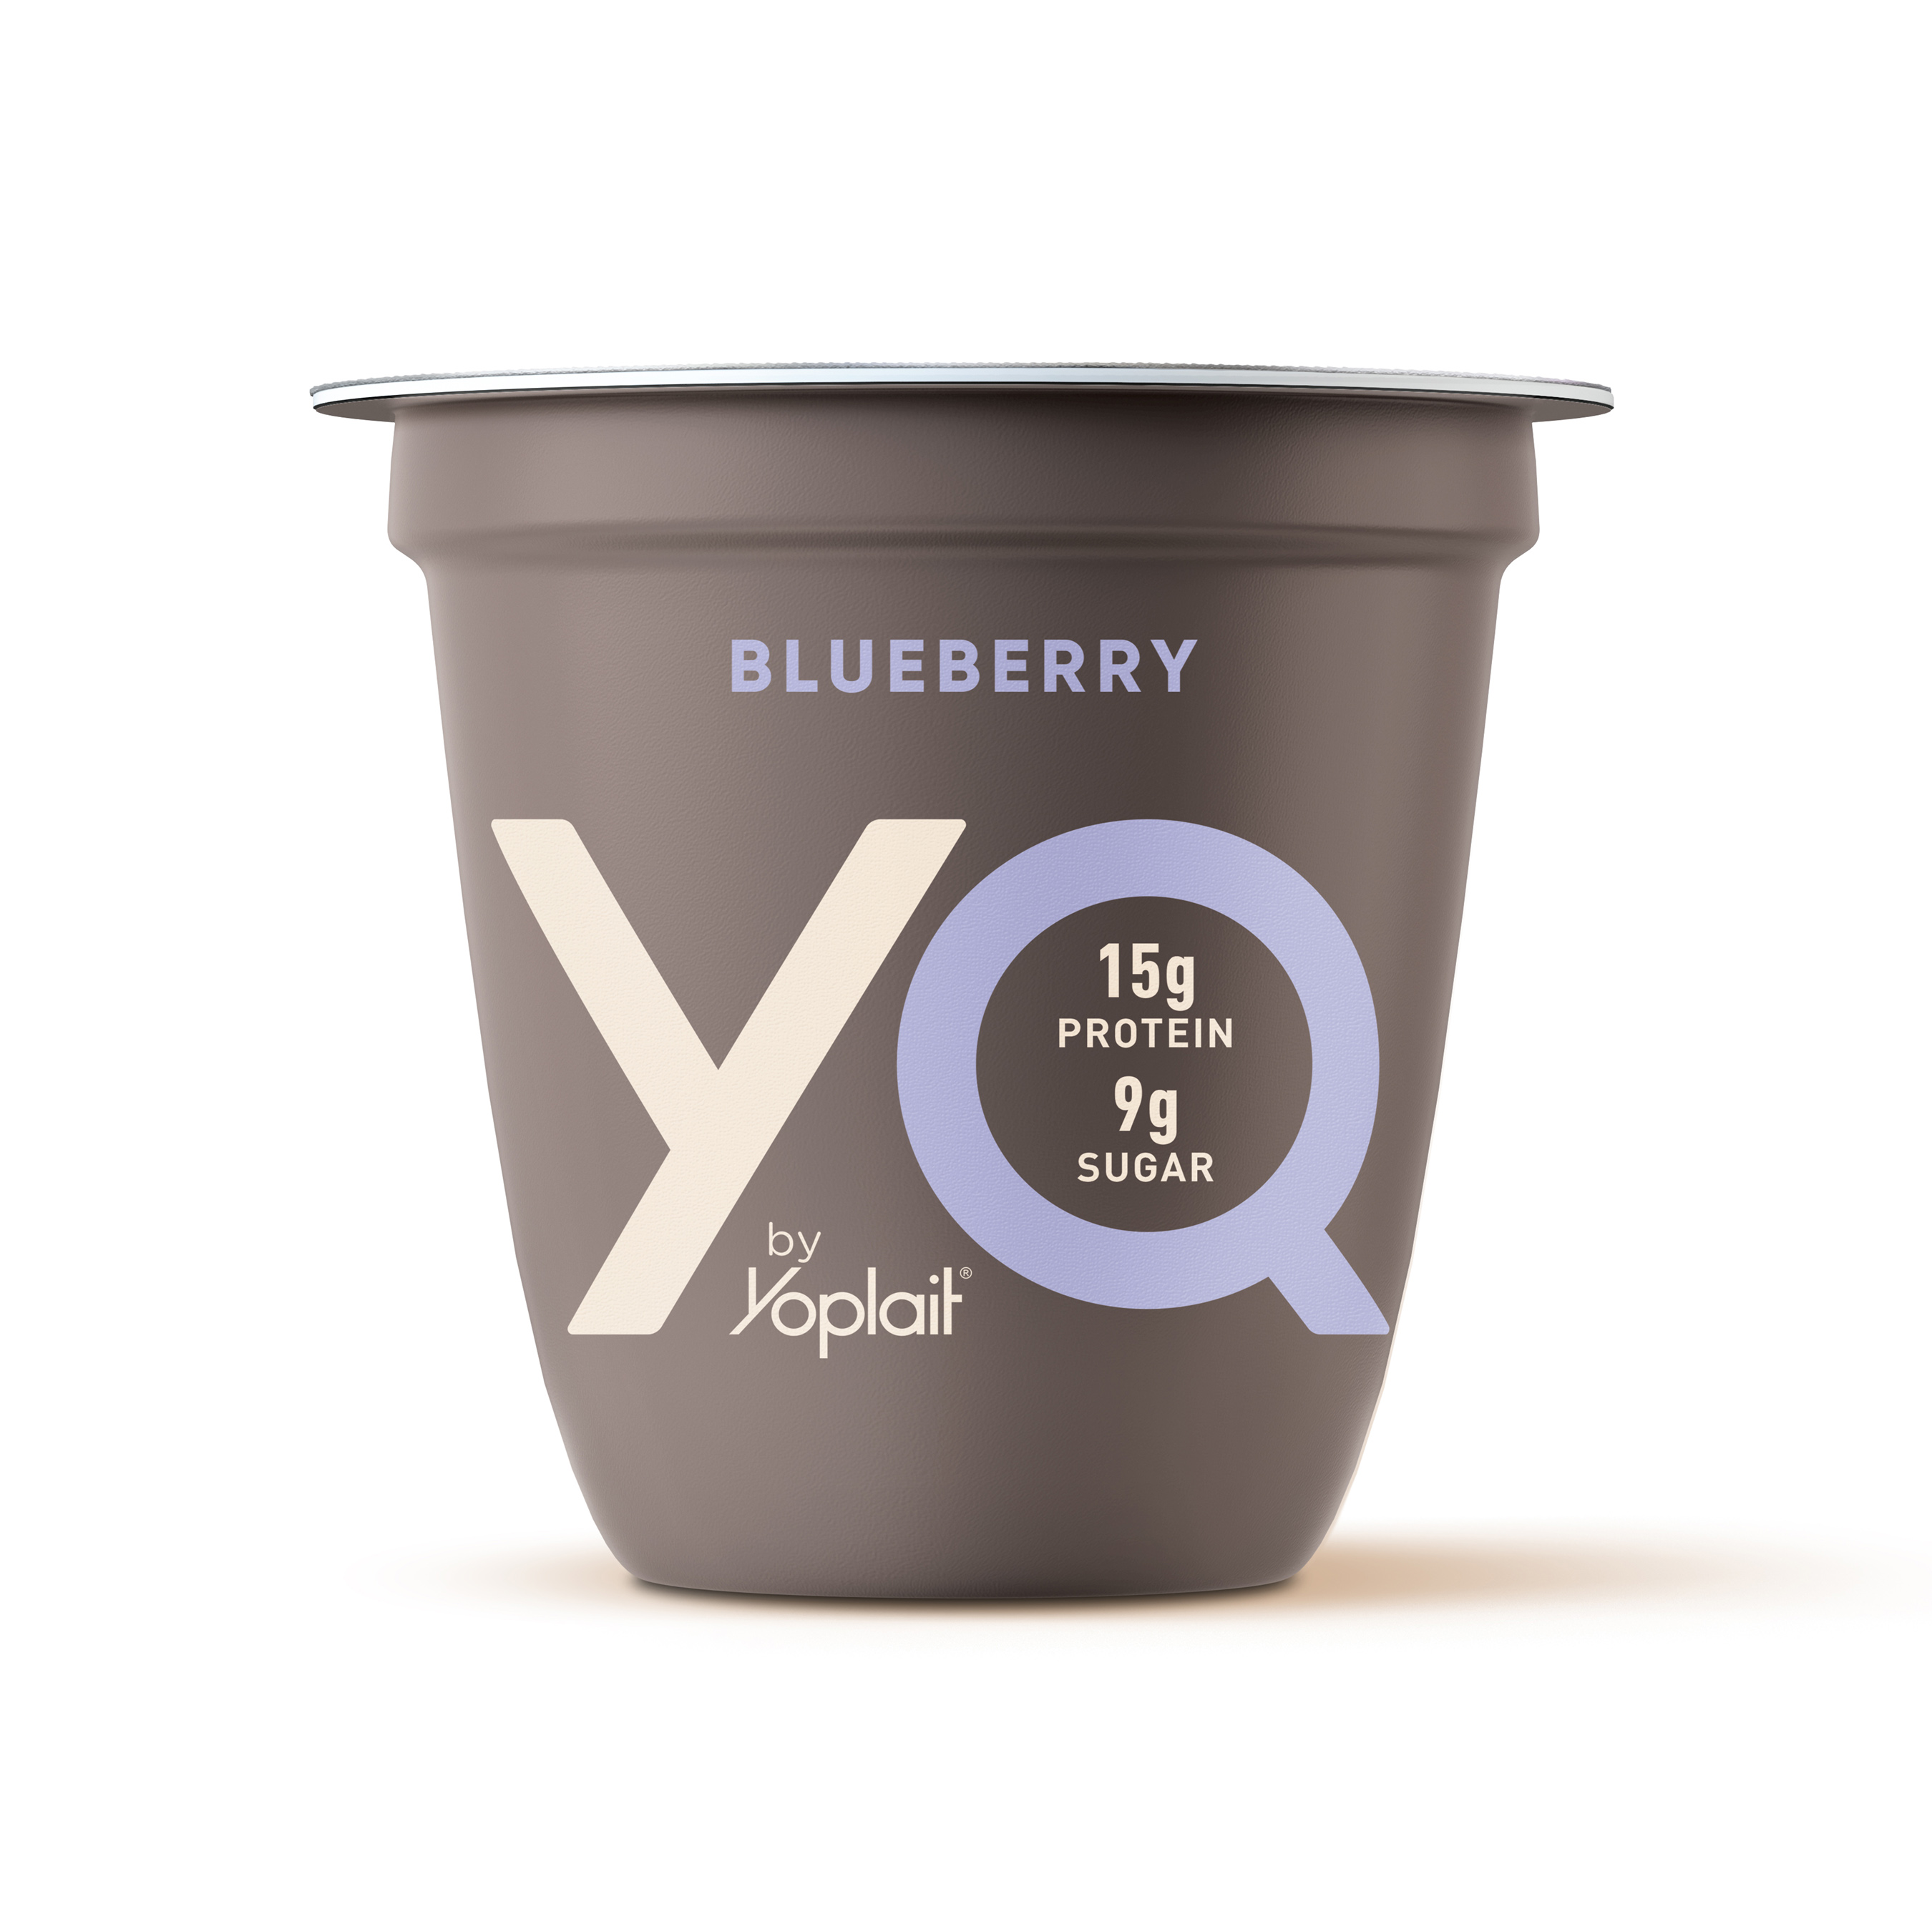 YQ by Yoplait’s flavored varieties - including Blueberry - deliver 9 grams of sugar and are lightly sweetened with just the right amount of cane sugar, real fruit and natural flavors.